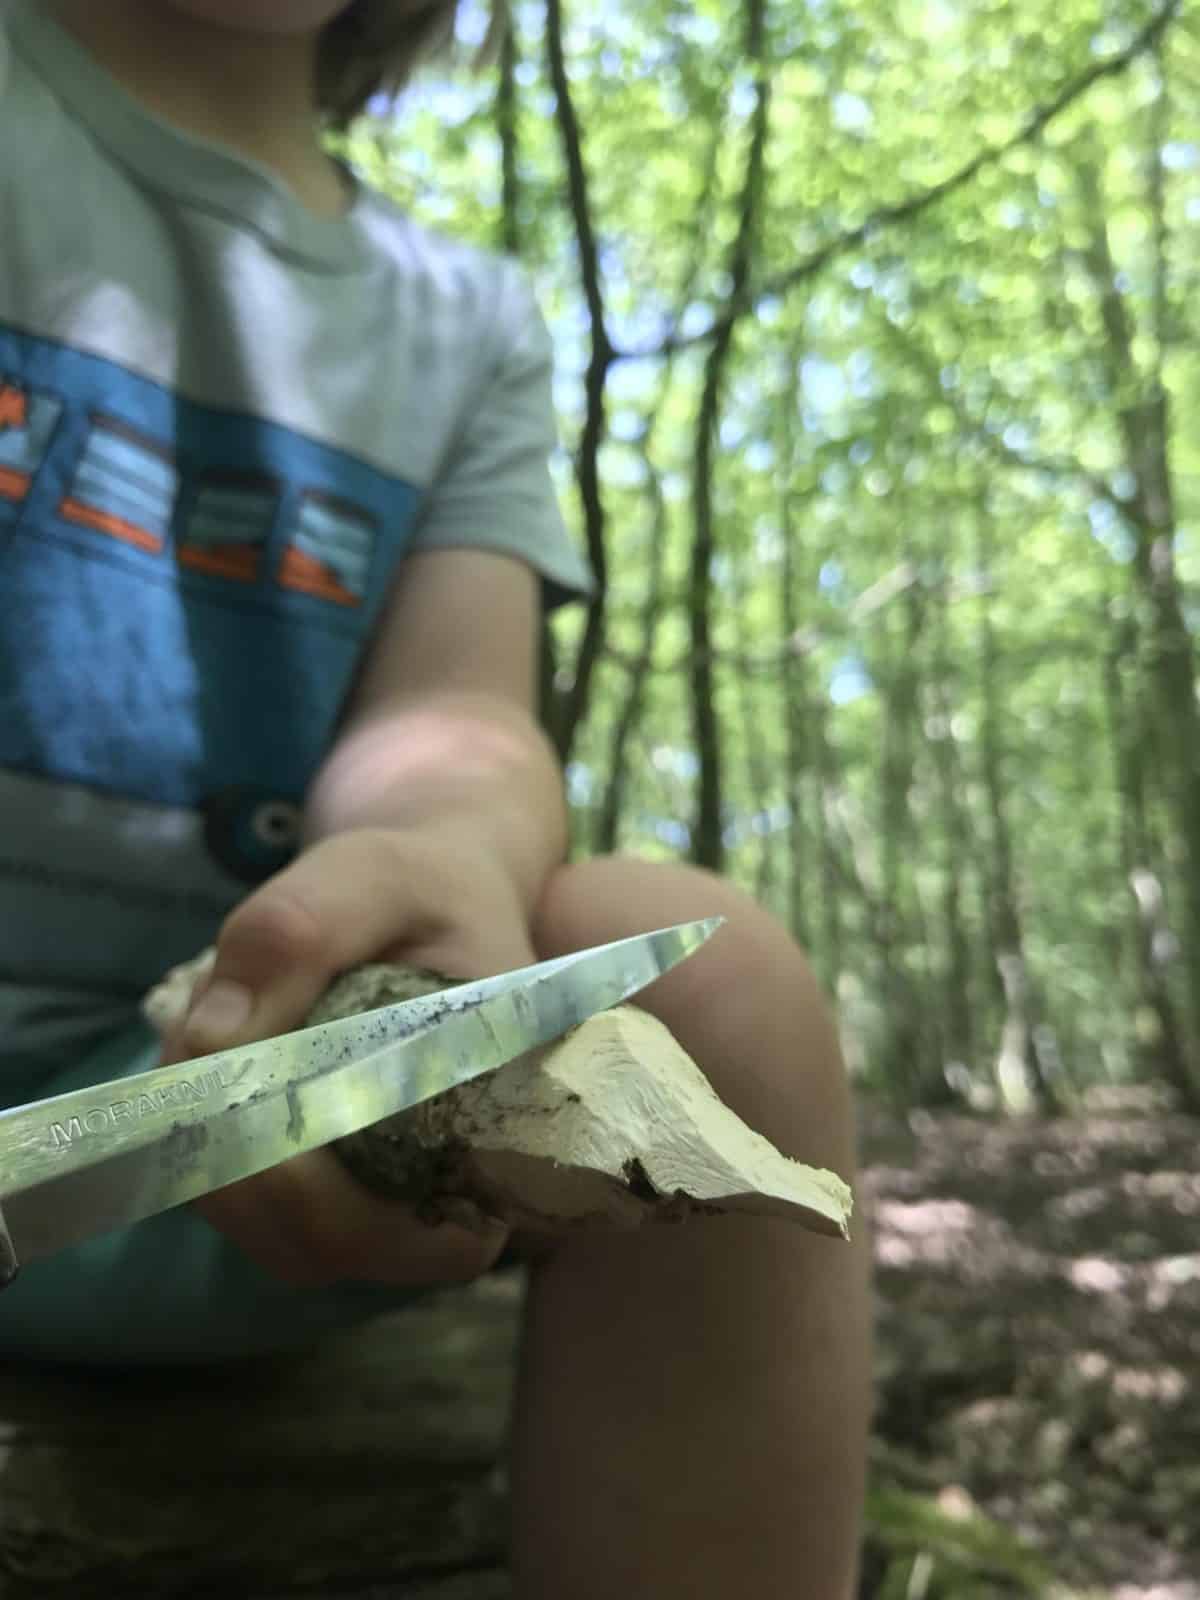 teaching kids how to whittle wood safely 